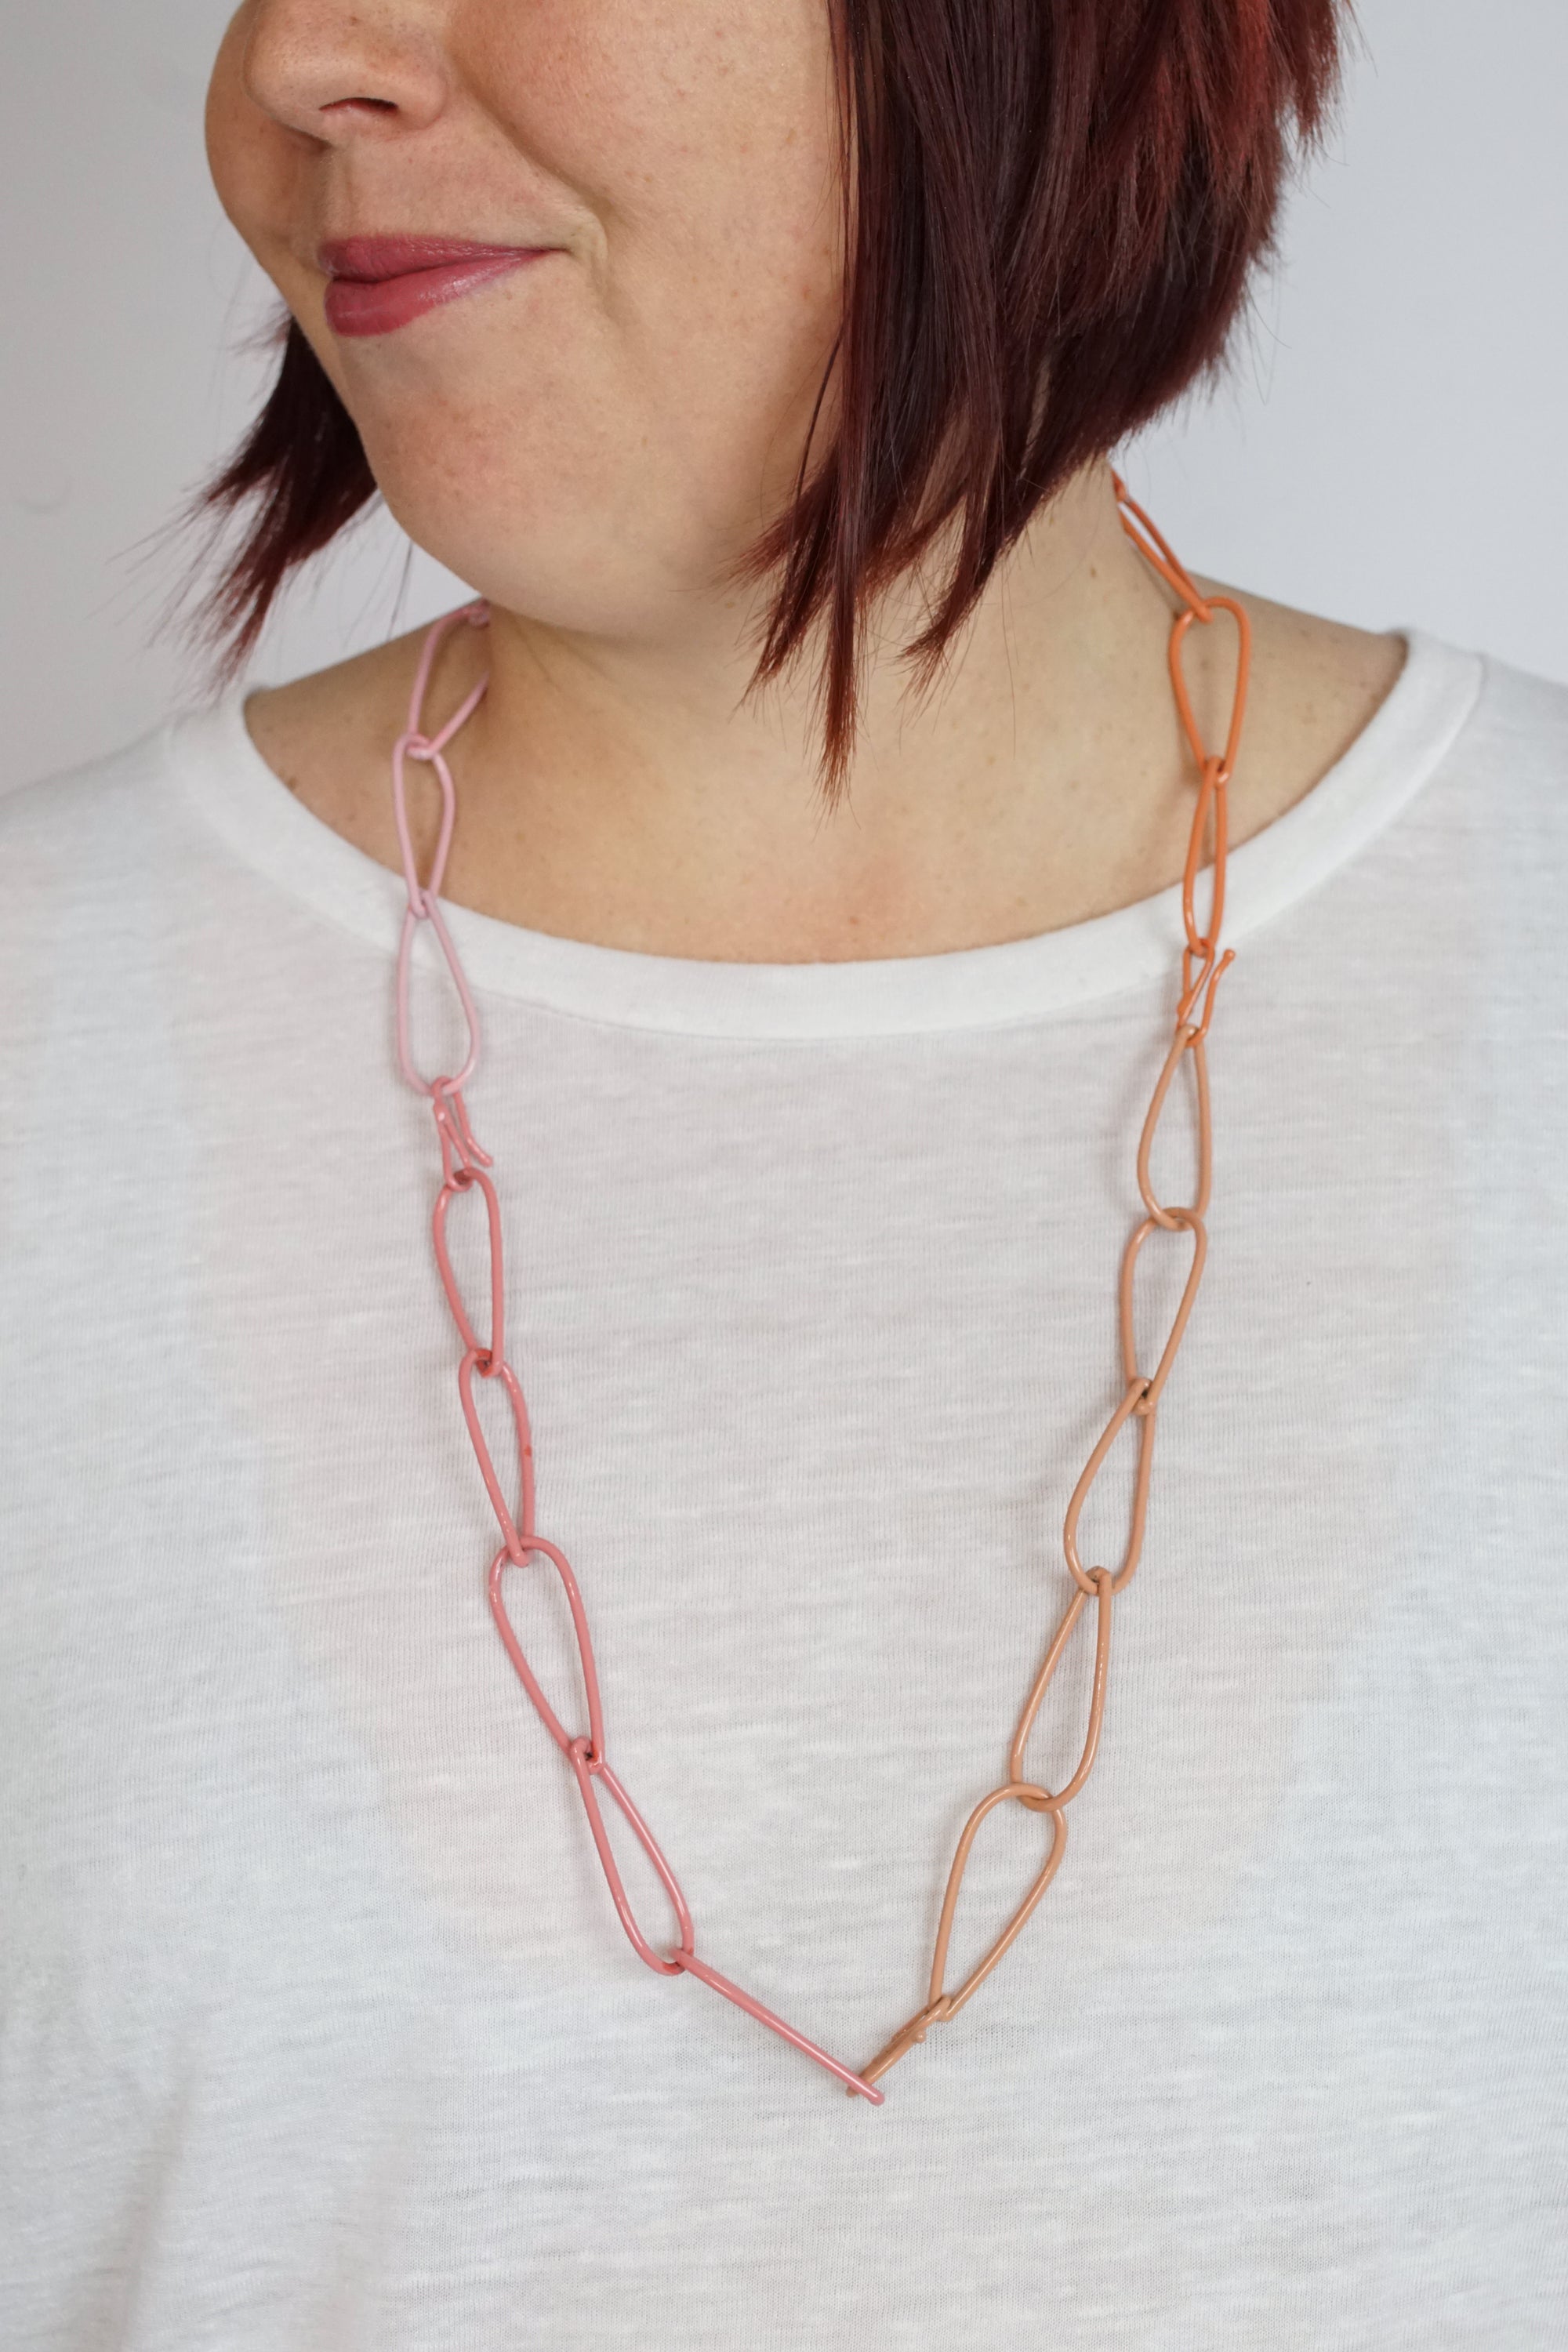 Long Modular Necklace in Dusty Rose, Desert Coral, Light Raspberry, and Bubble Gum